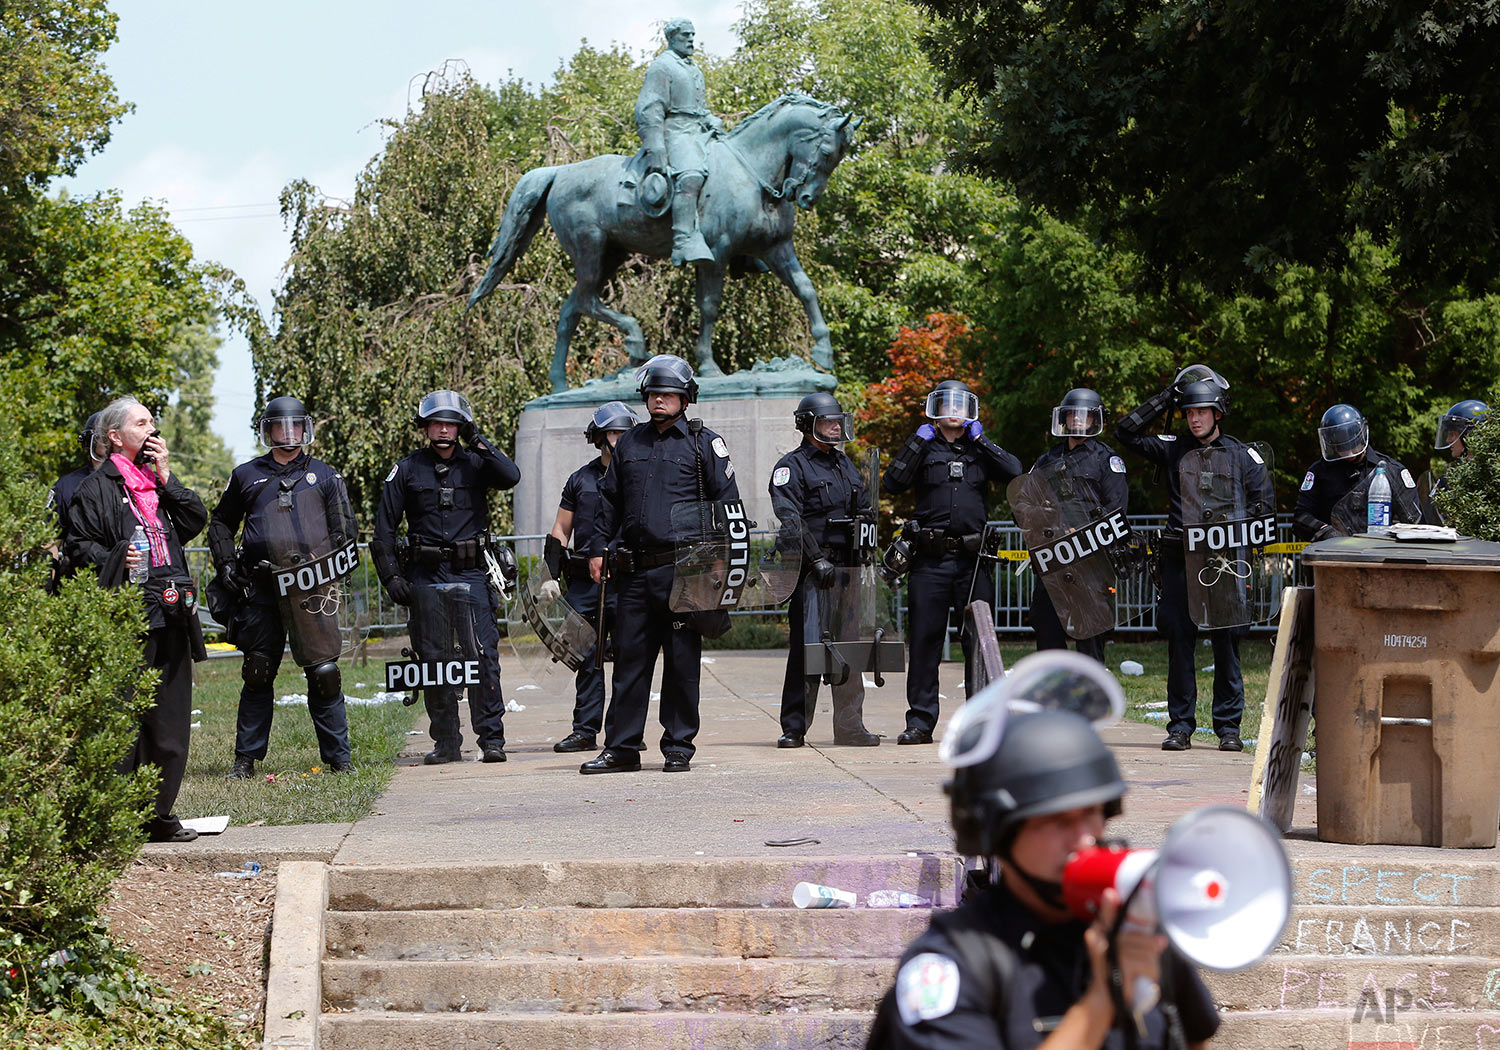  State Police in riot gear guard Lee Park after a white nationalist demonstration was declared illegal and the park was cleared in Charlottesville, Va., Saturday, Aug. 12, 2017.  Hundreds of people chanted, threw punches, hurled water bottles and unl